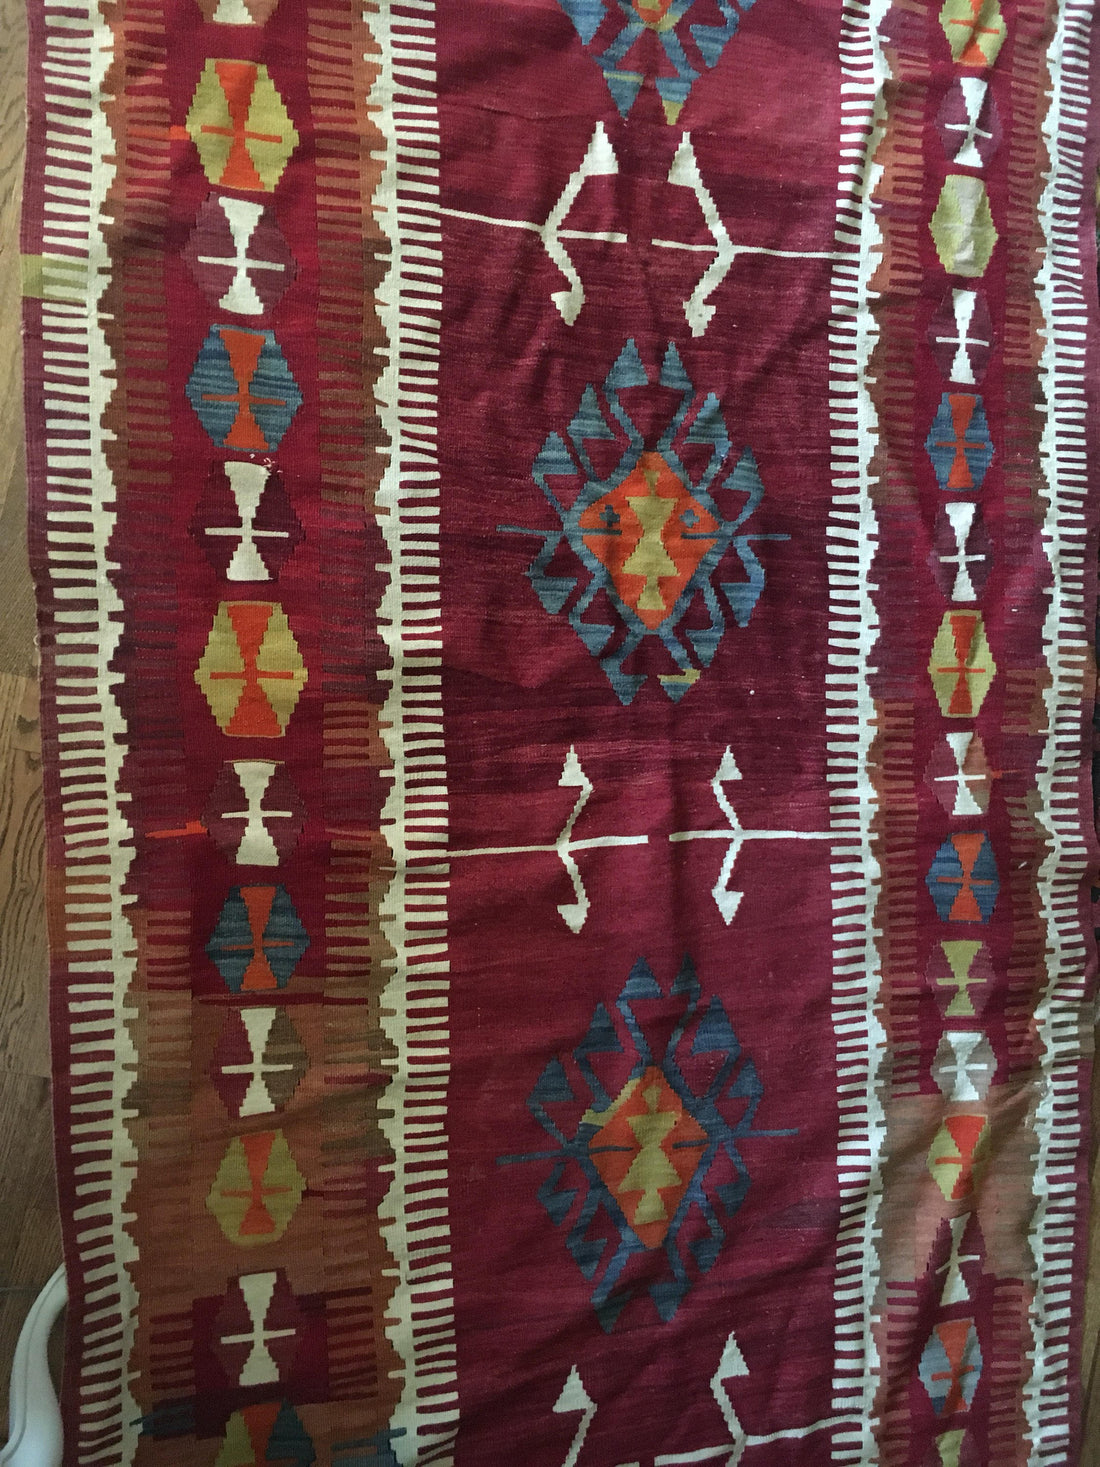 Turkish Kilim Hand Woven Rug (dyed with vegetable coloring)